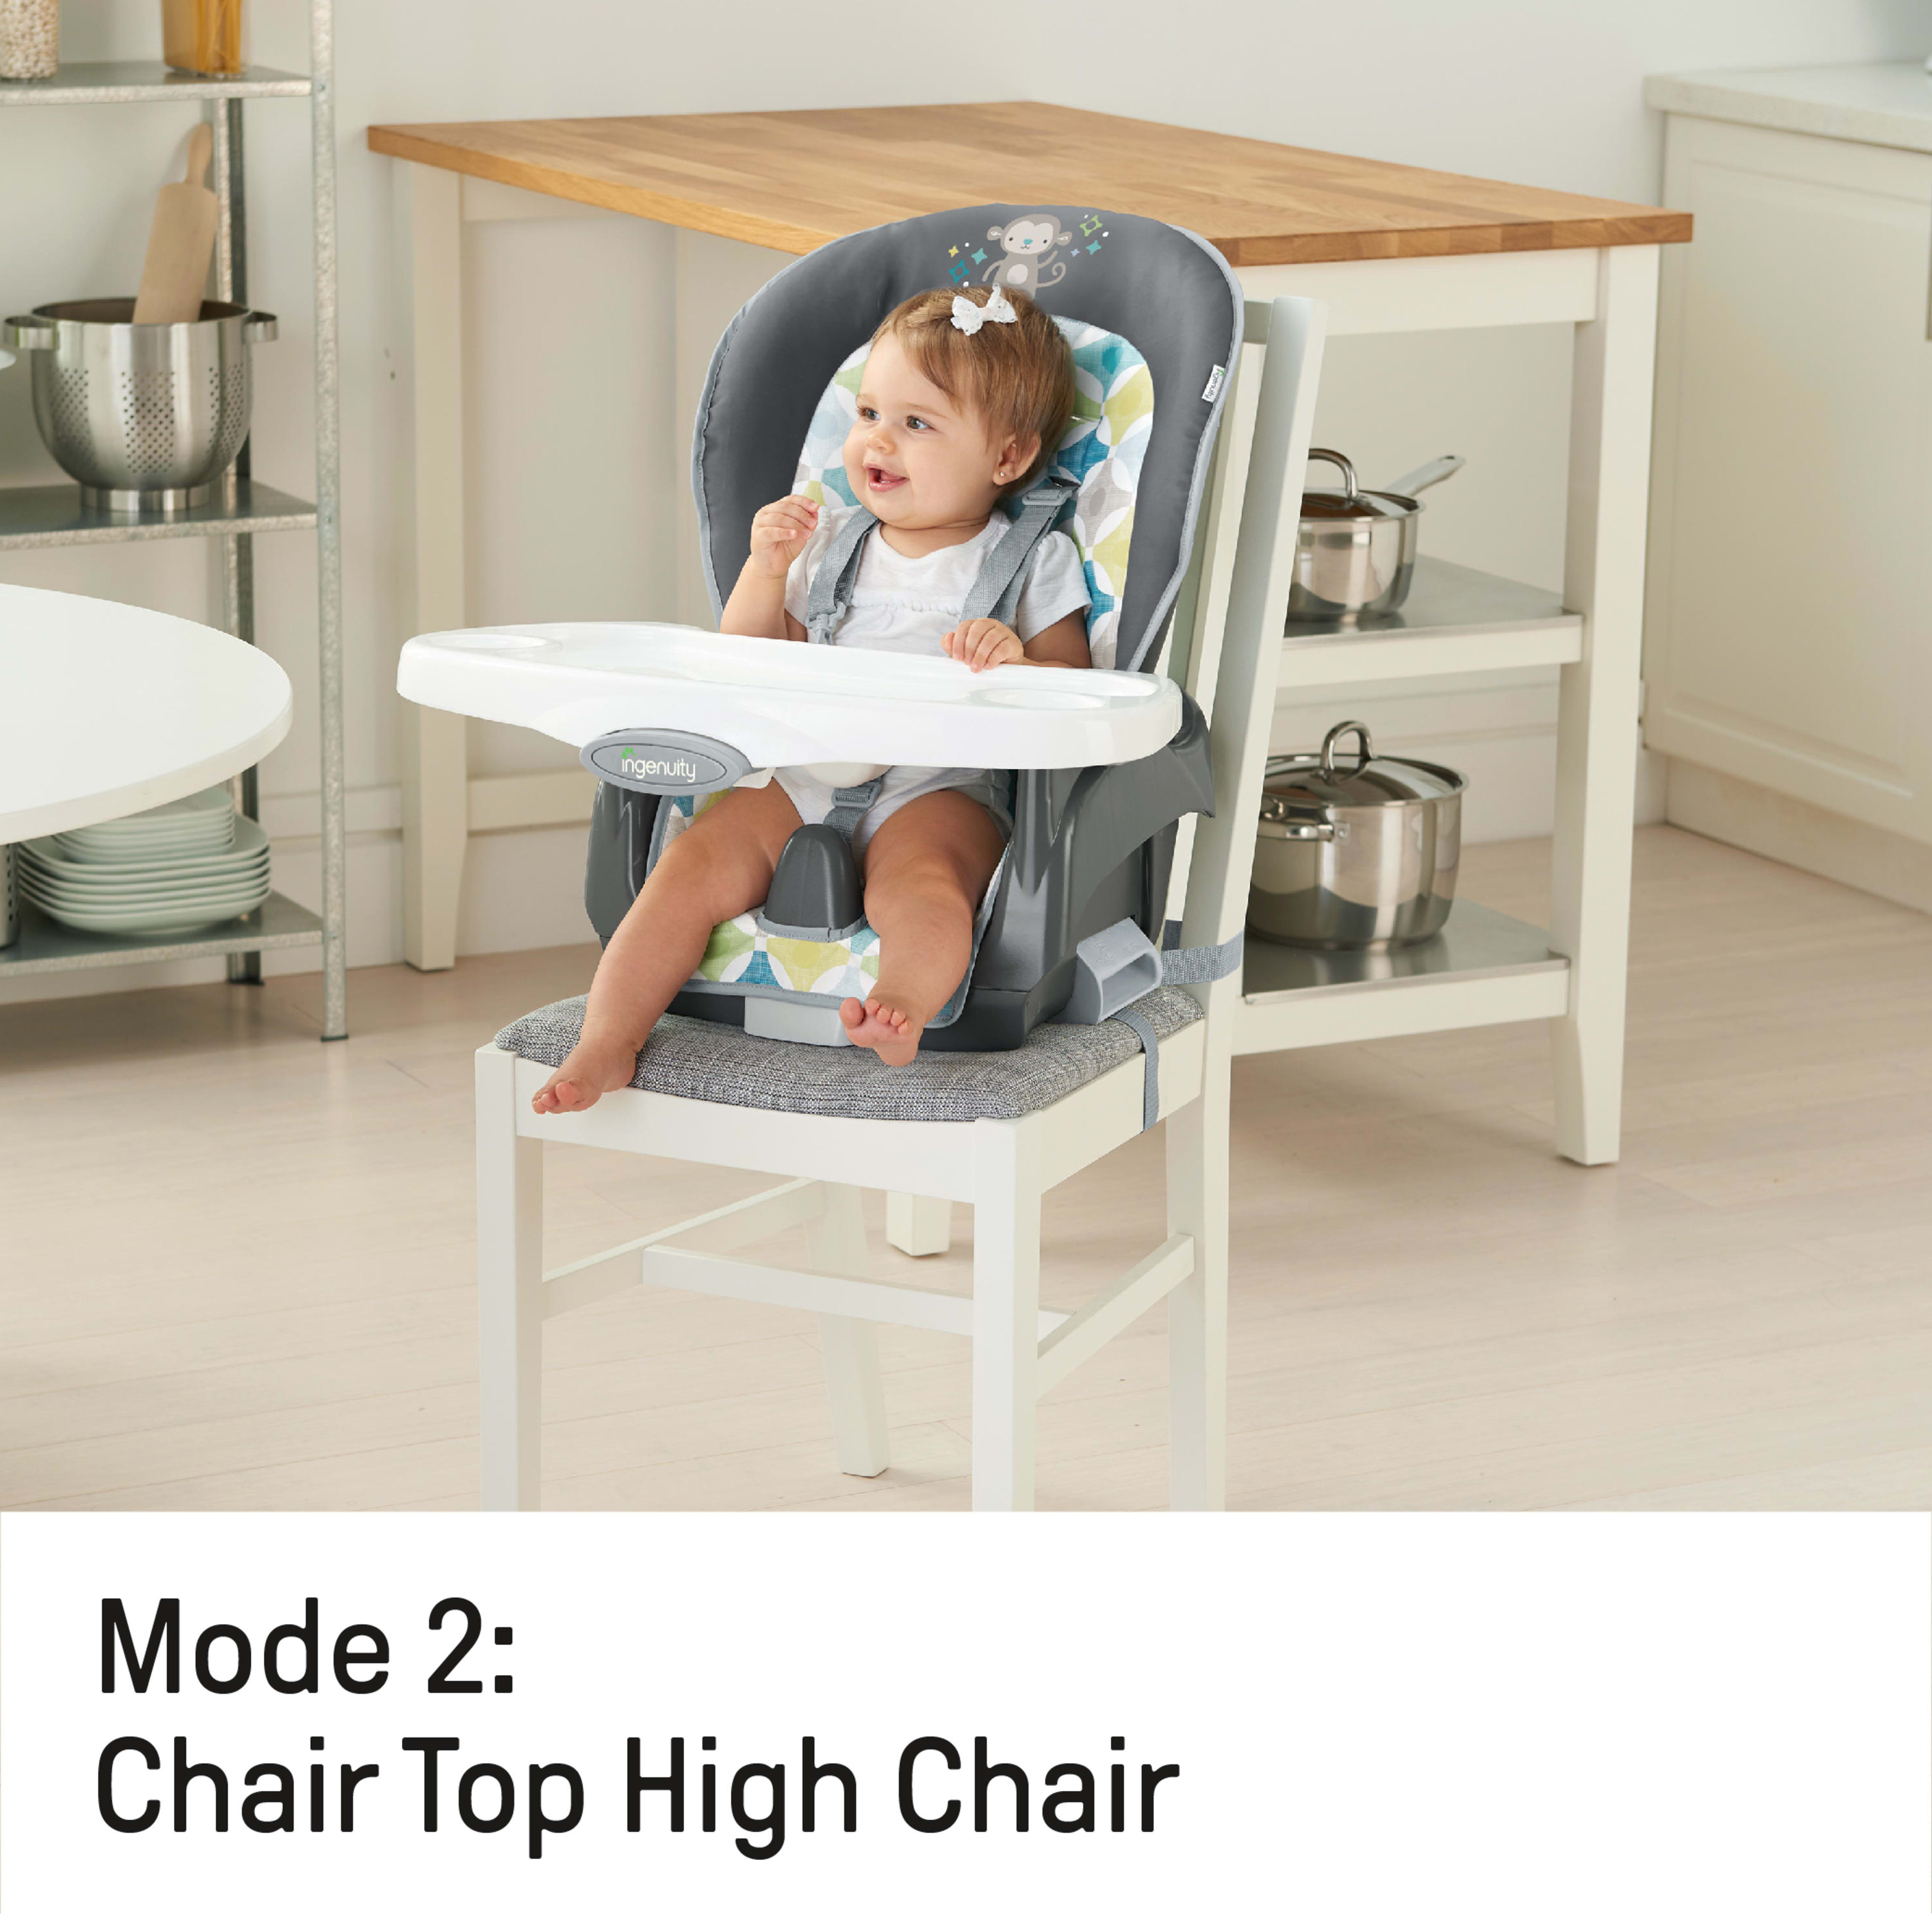 Ingenuity Trio 3-in-1 High Chair - Moreland - image 5 of 12